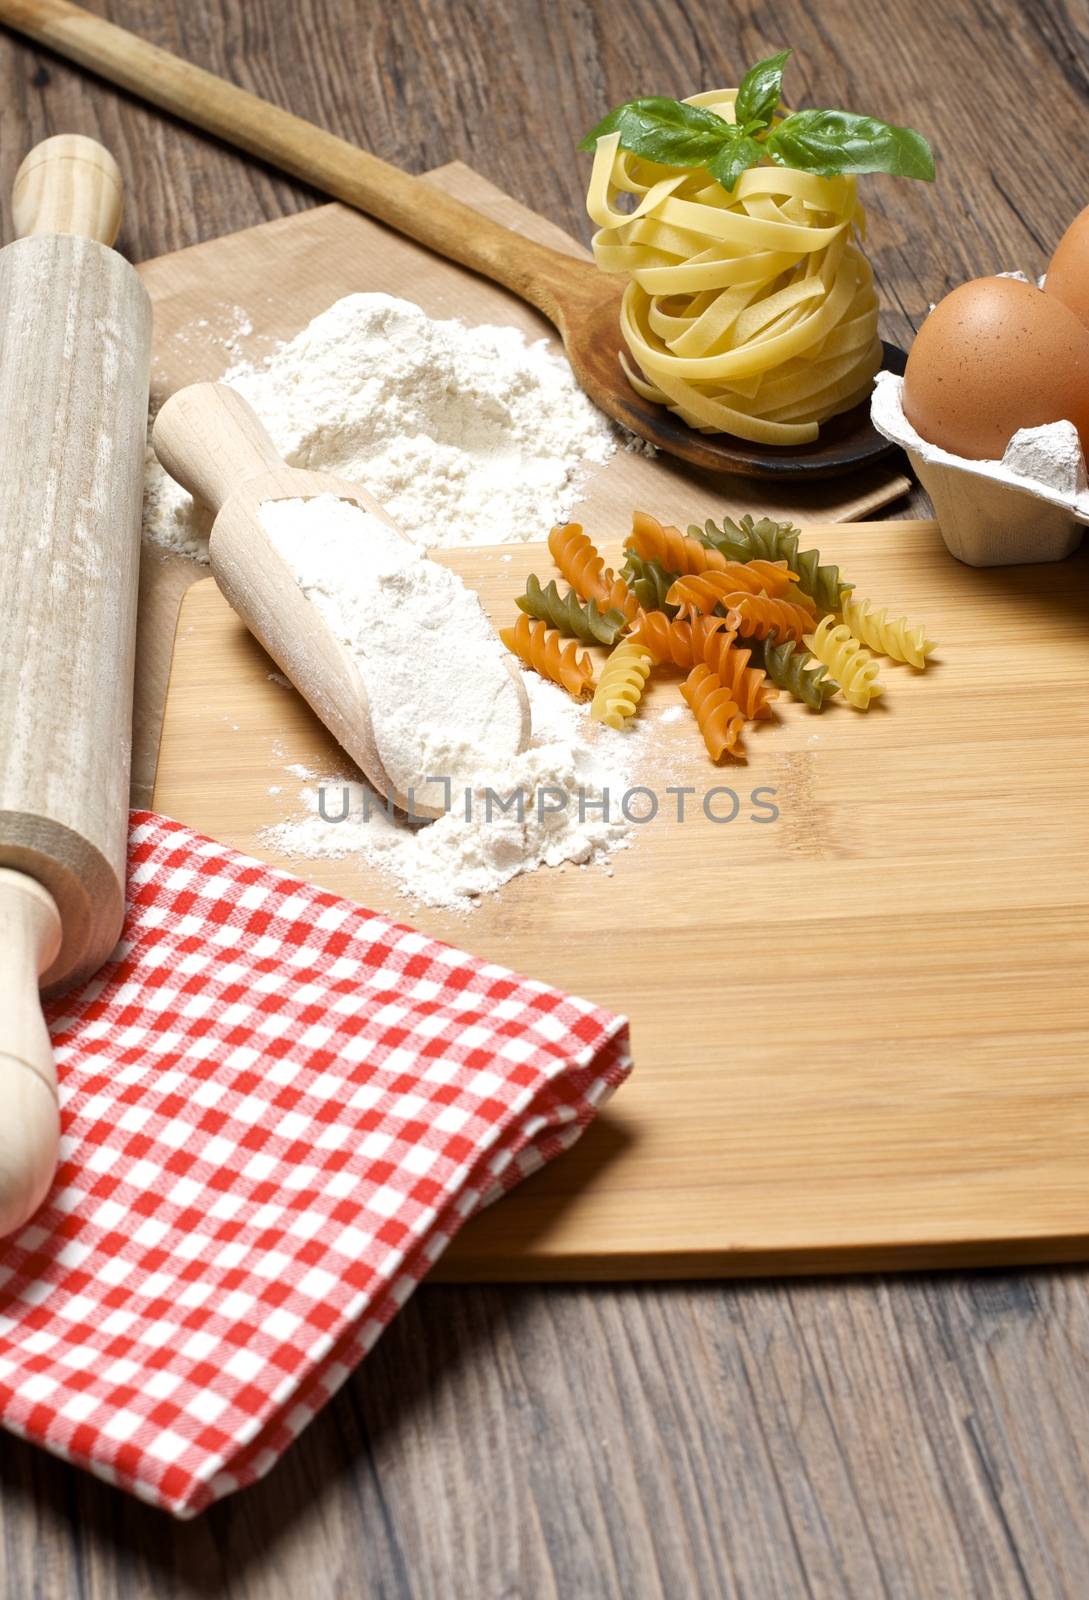 Still life with raw homemade pasta and ingredients for pasta